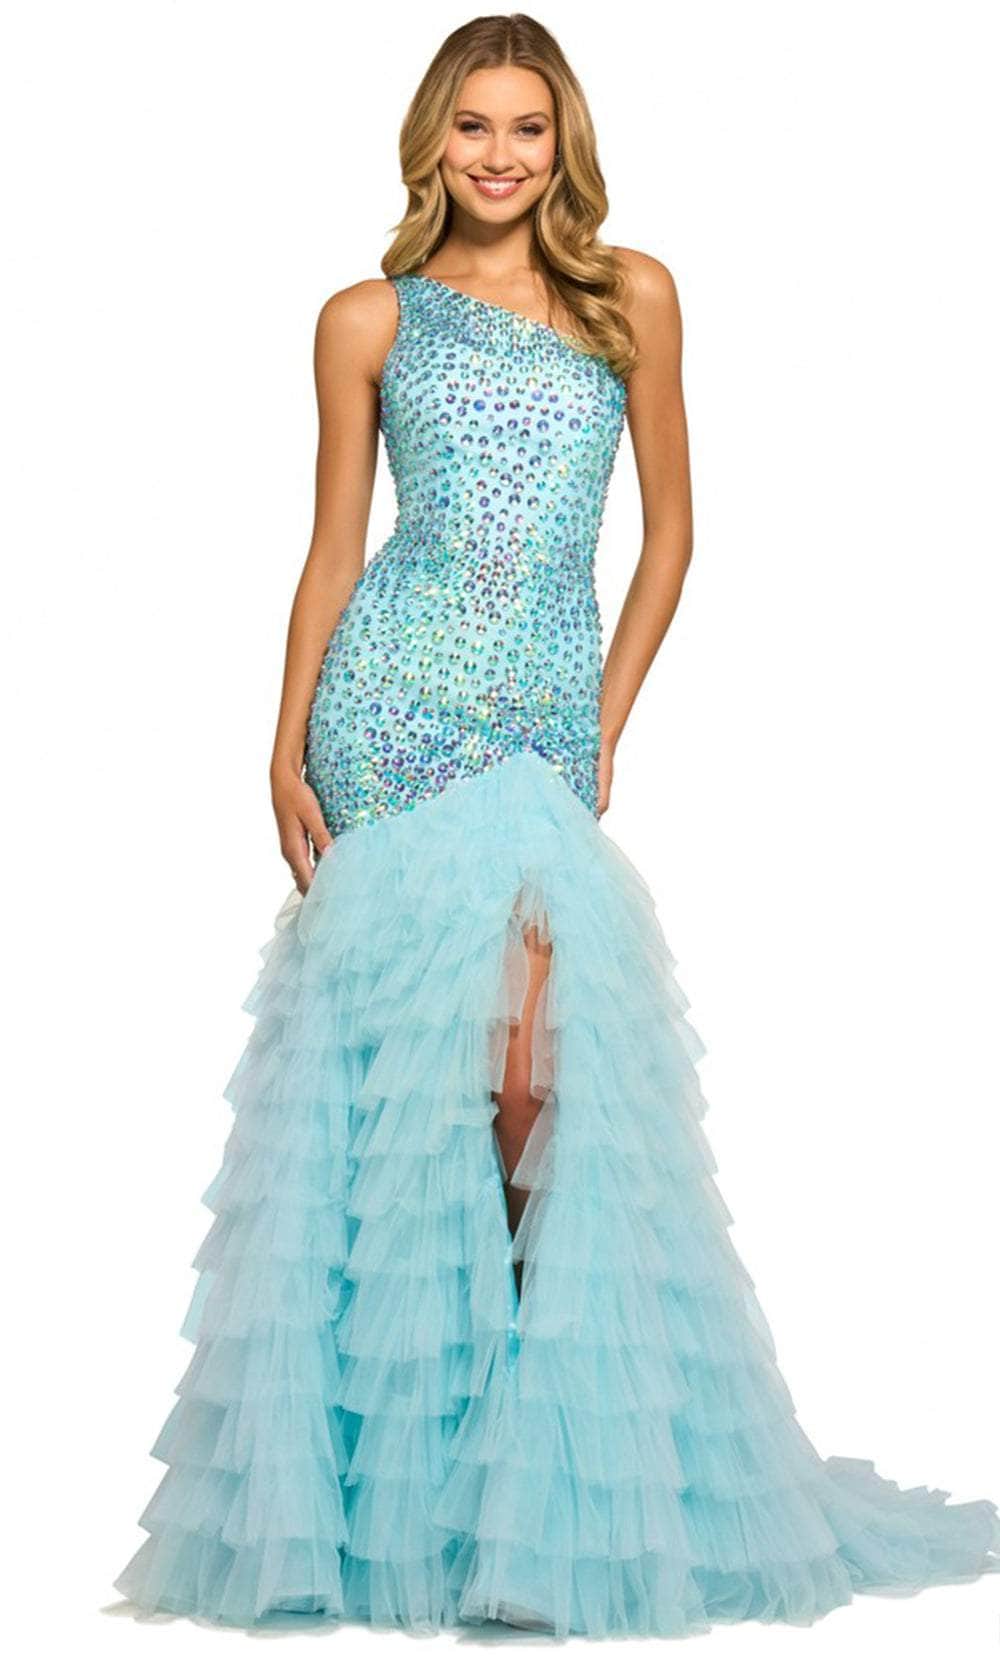 Image of Sherri Hill 55357 - One-Sleeve Beaded Prom Gown